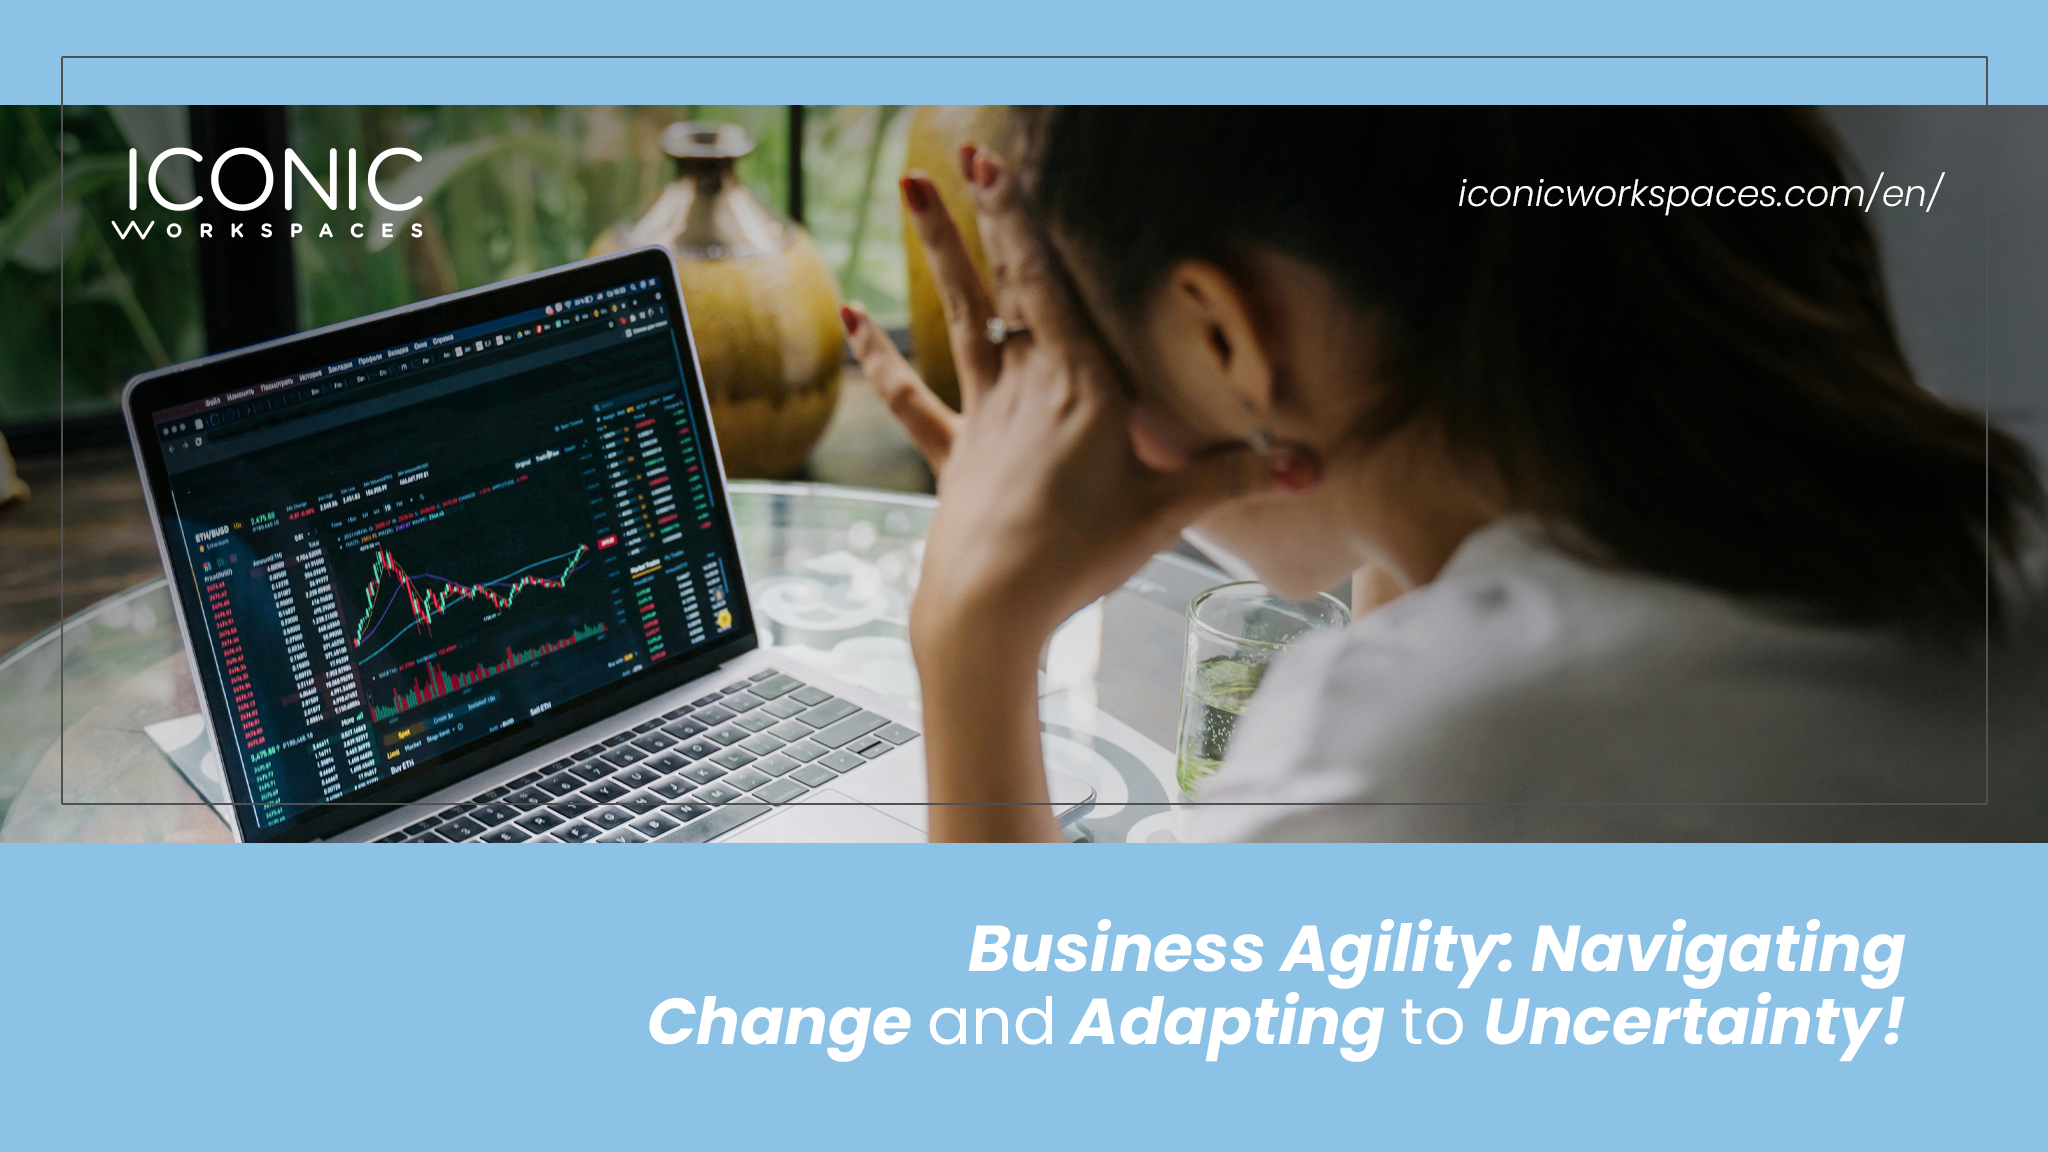 Business Agility: Navigating Change and Adapting to Uncertainty